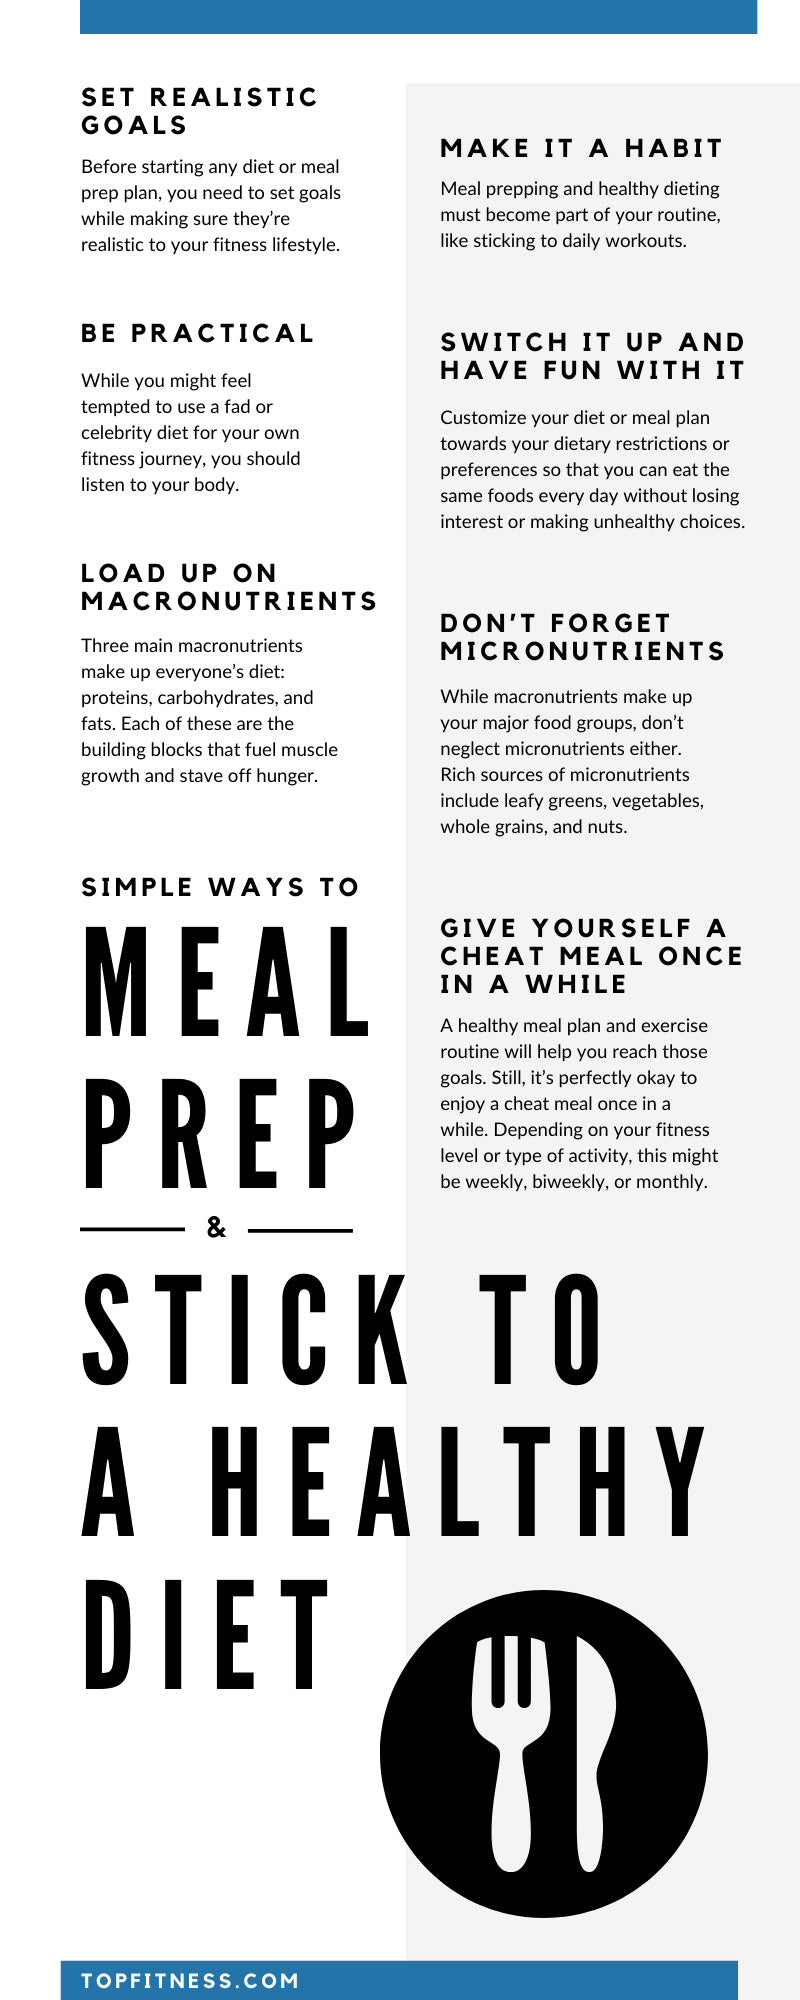 Simple Ways to Meal Prep & Stick to a Healthy Diet